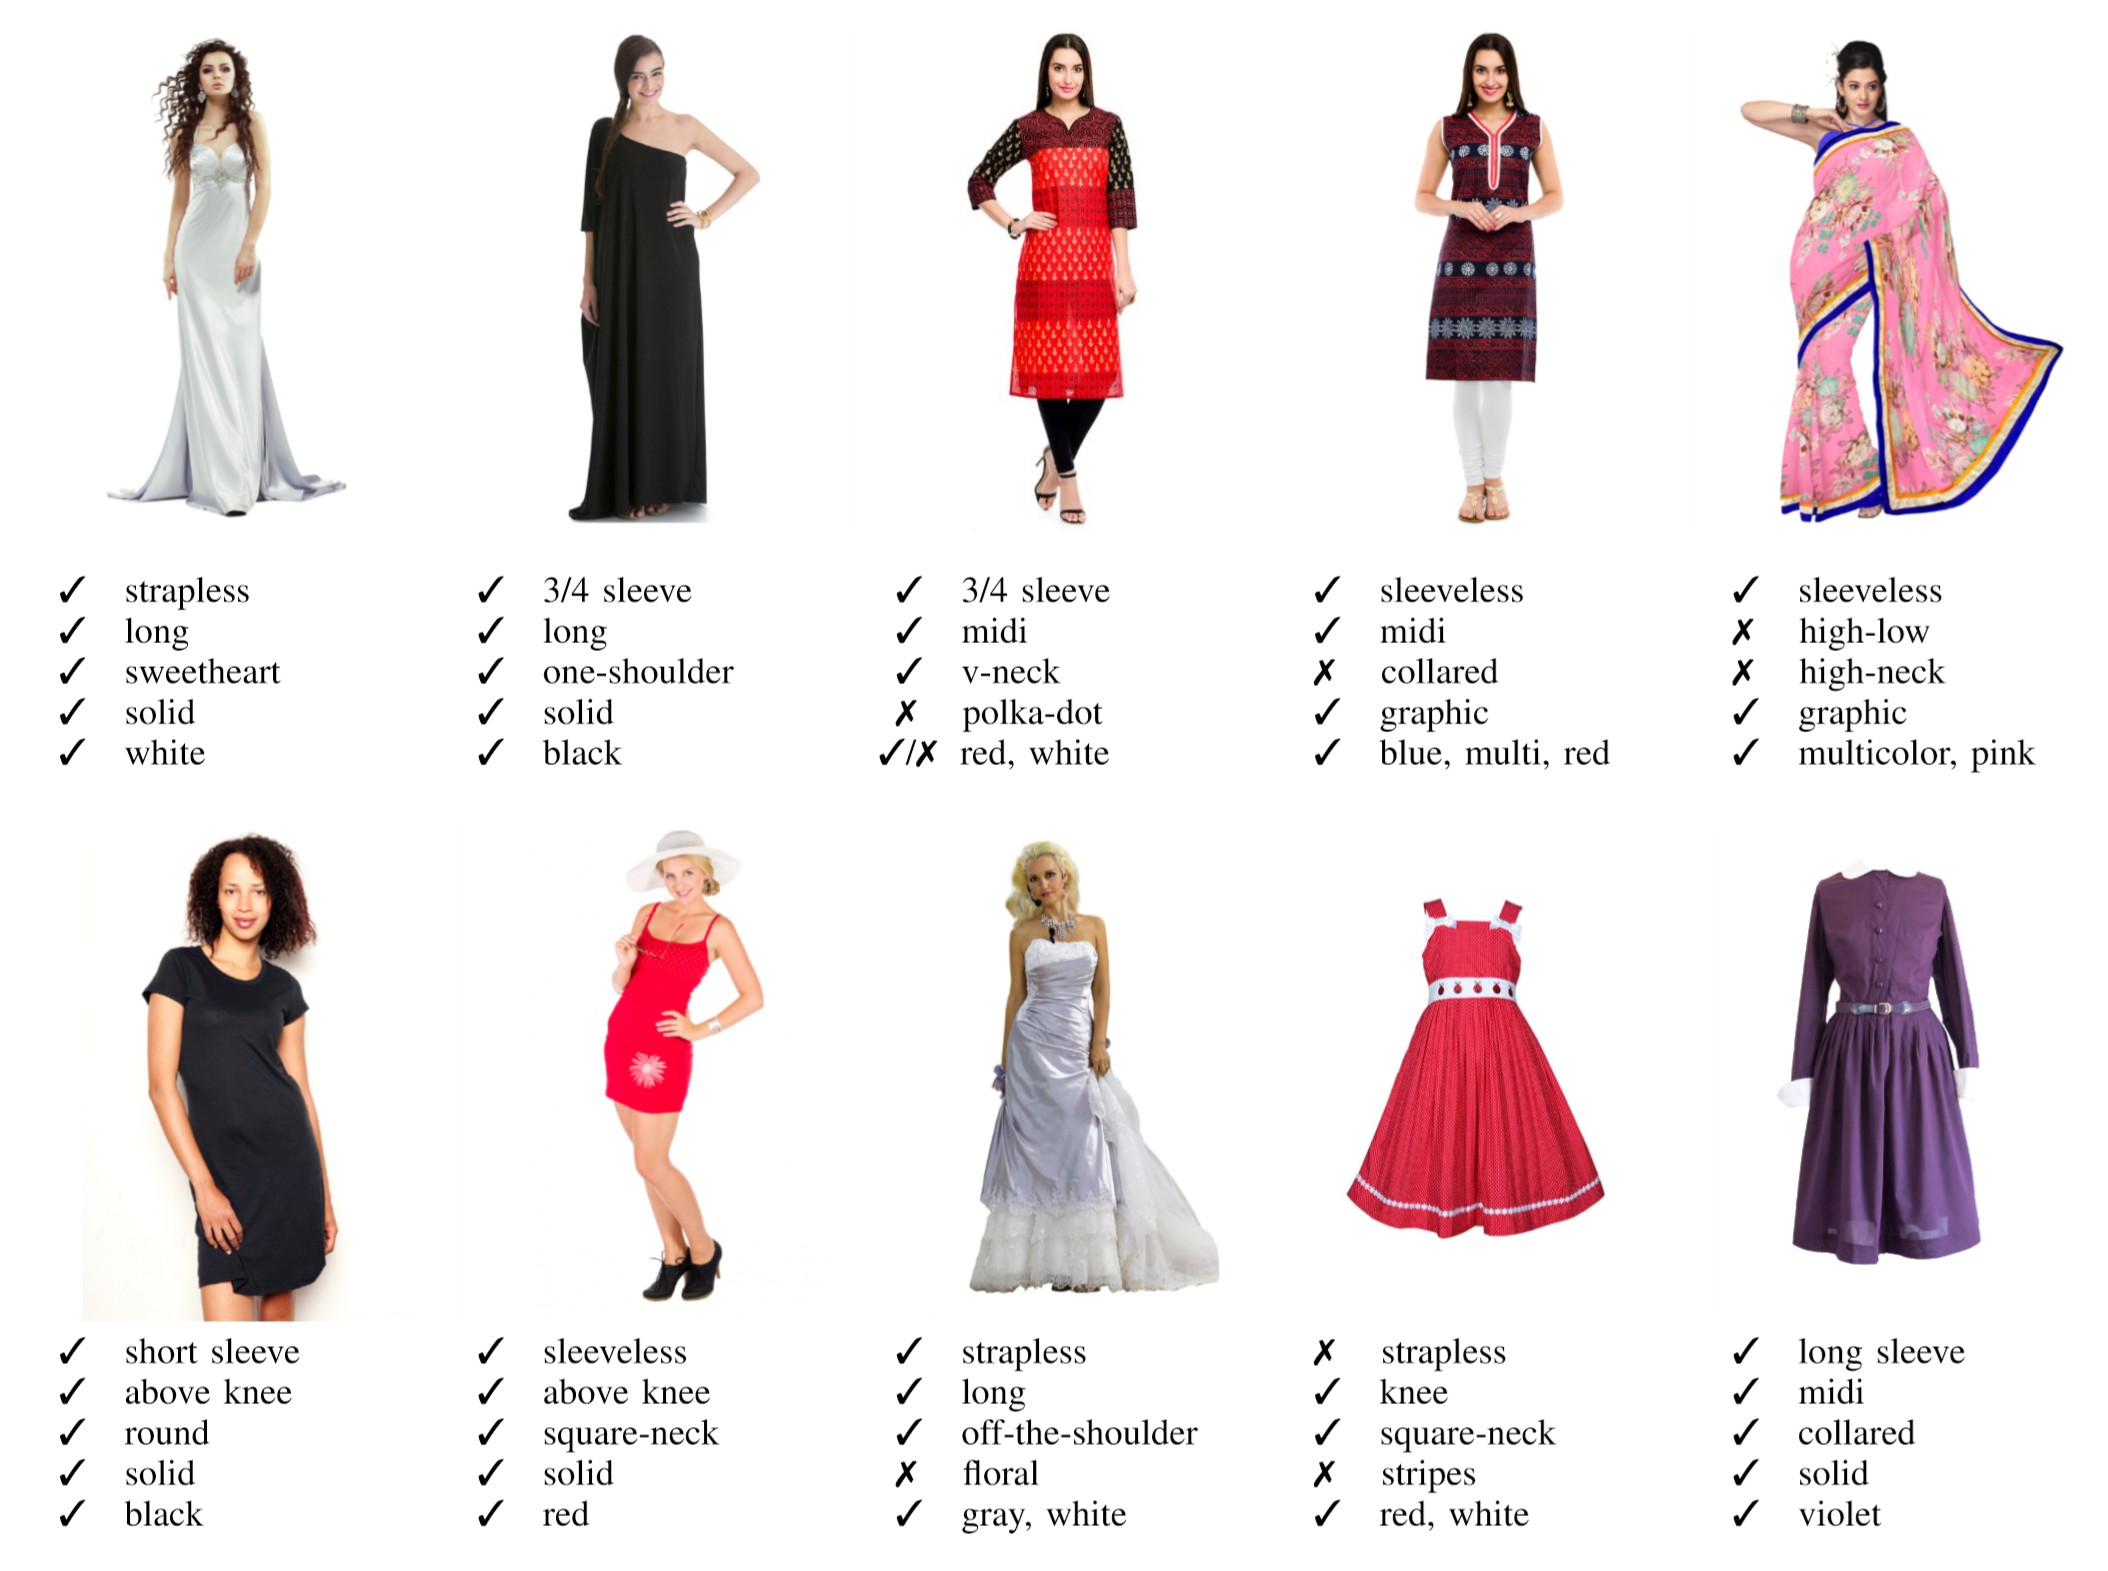 Sampe clothing images and attributes assigned by CNN